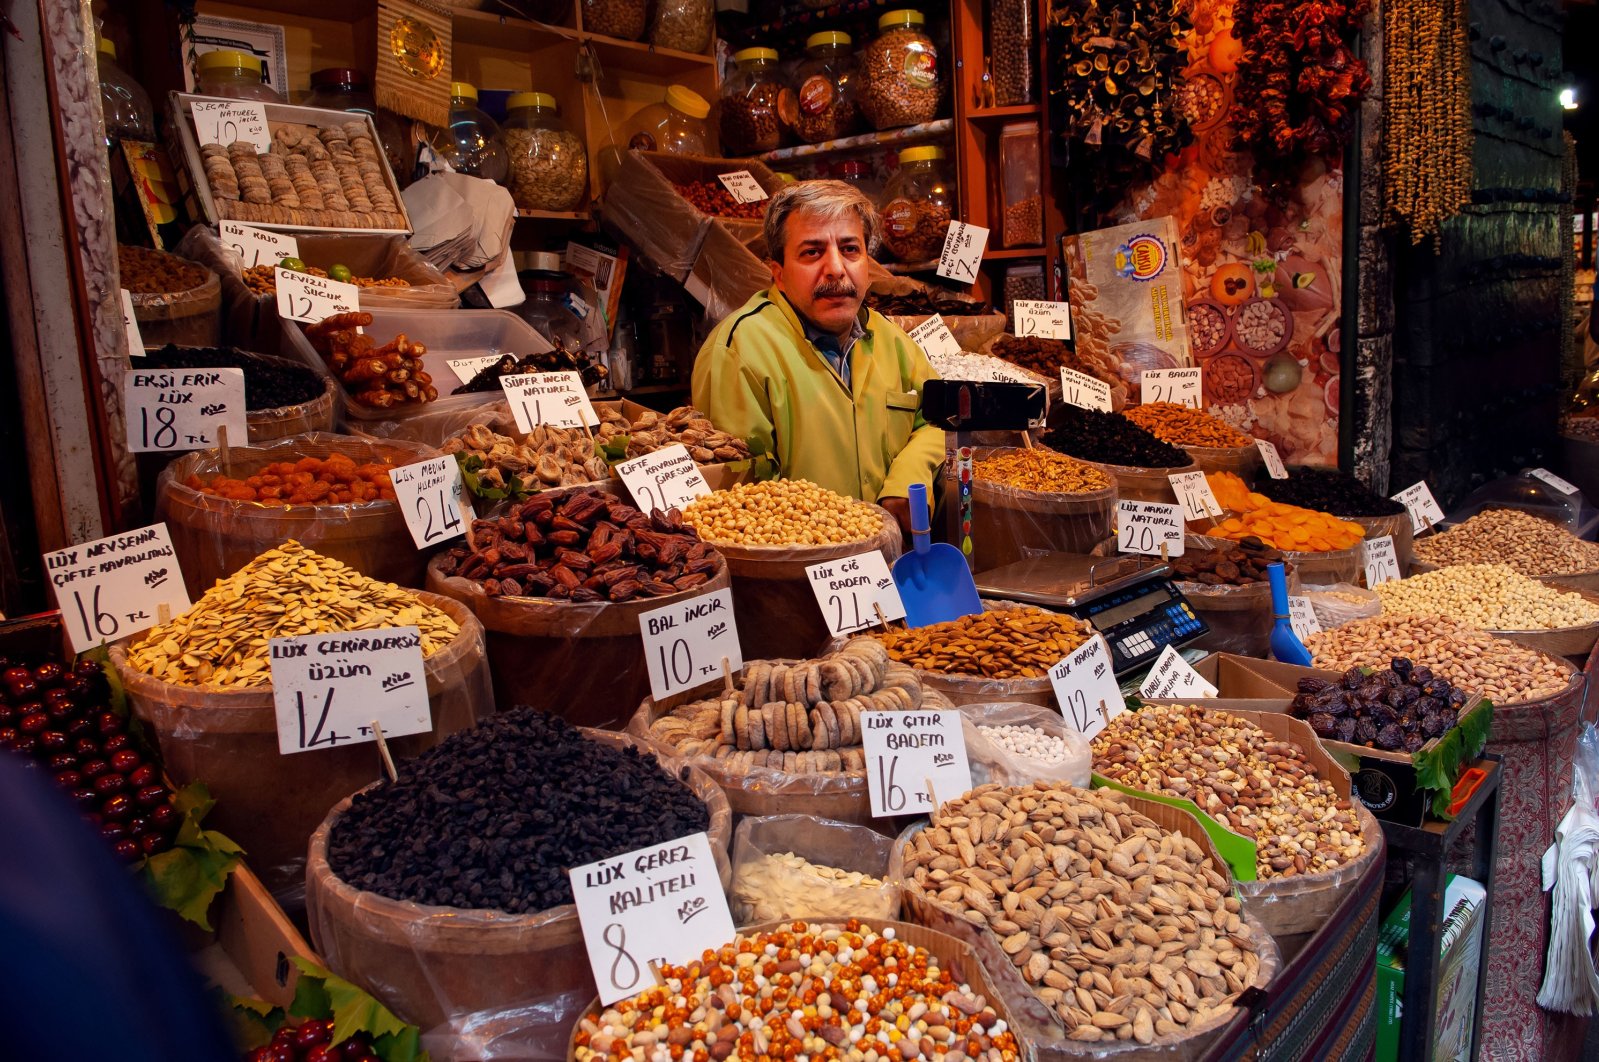 A Turkish stallholder selling dried fruits and nuts at the Spice Bazaar in Istanbul, May 20, 2010. (Getty Images Photo)